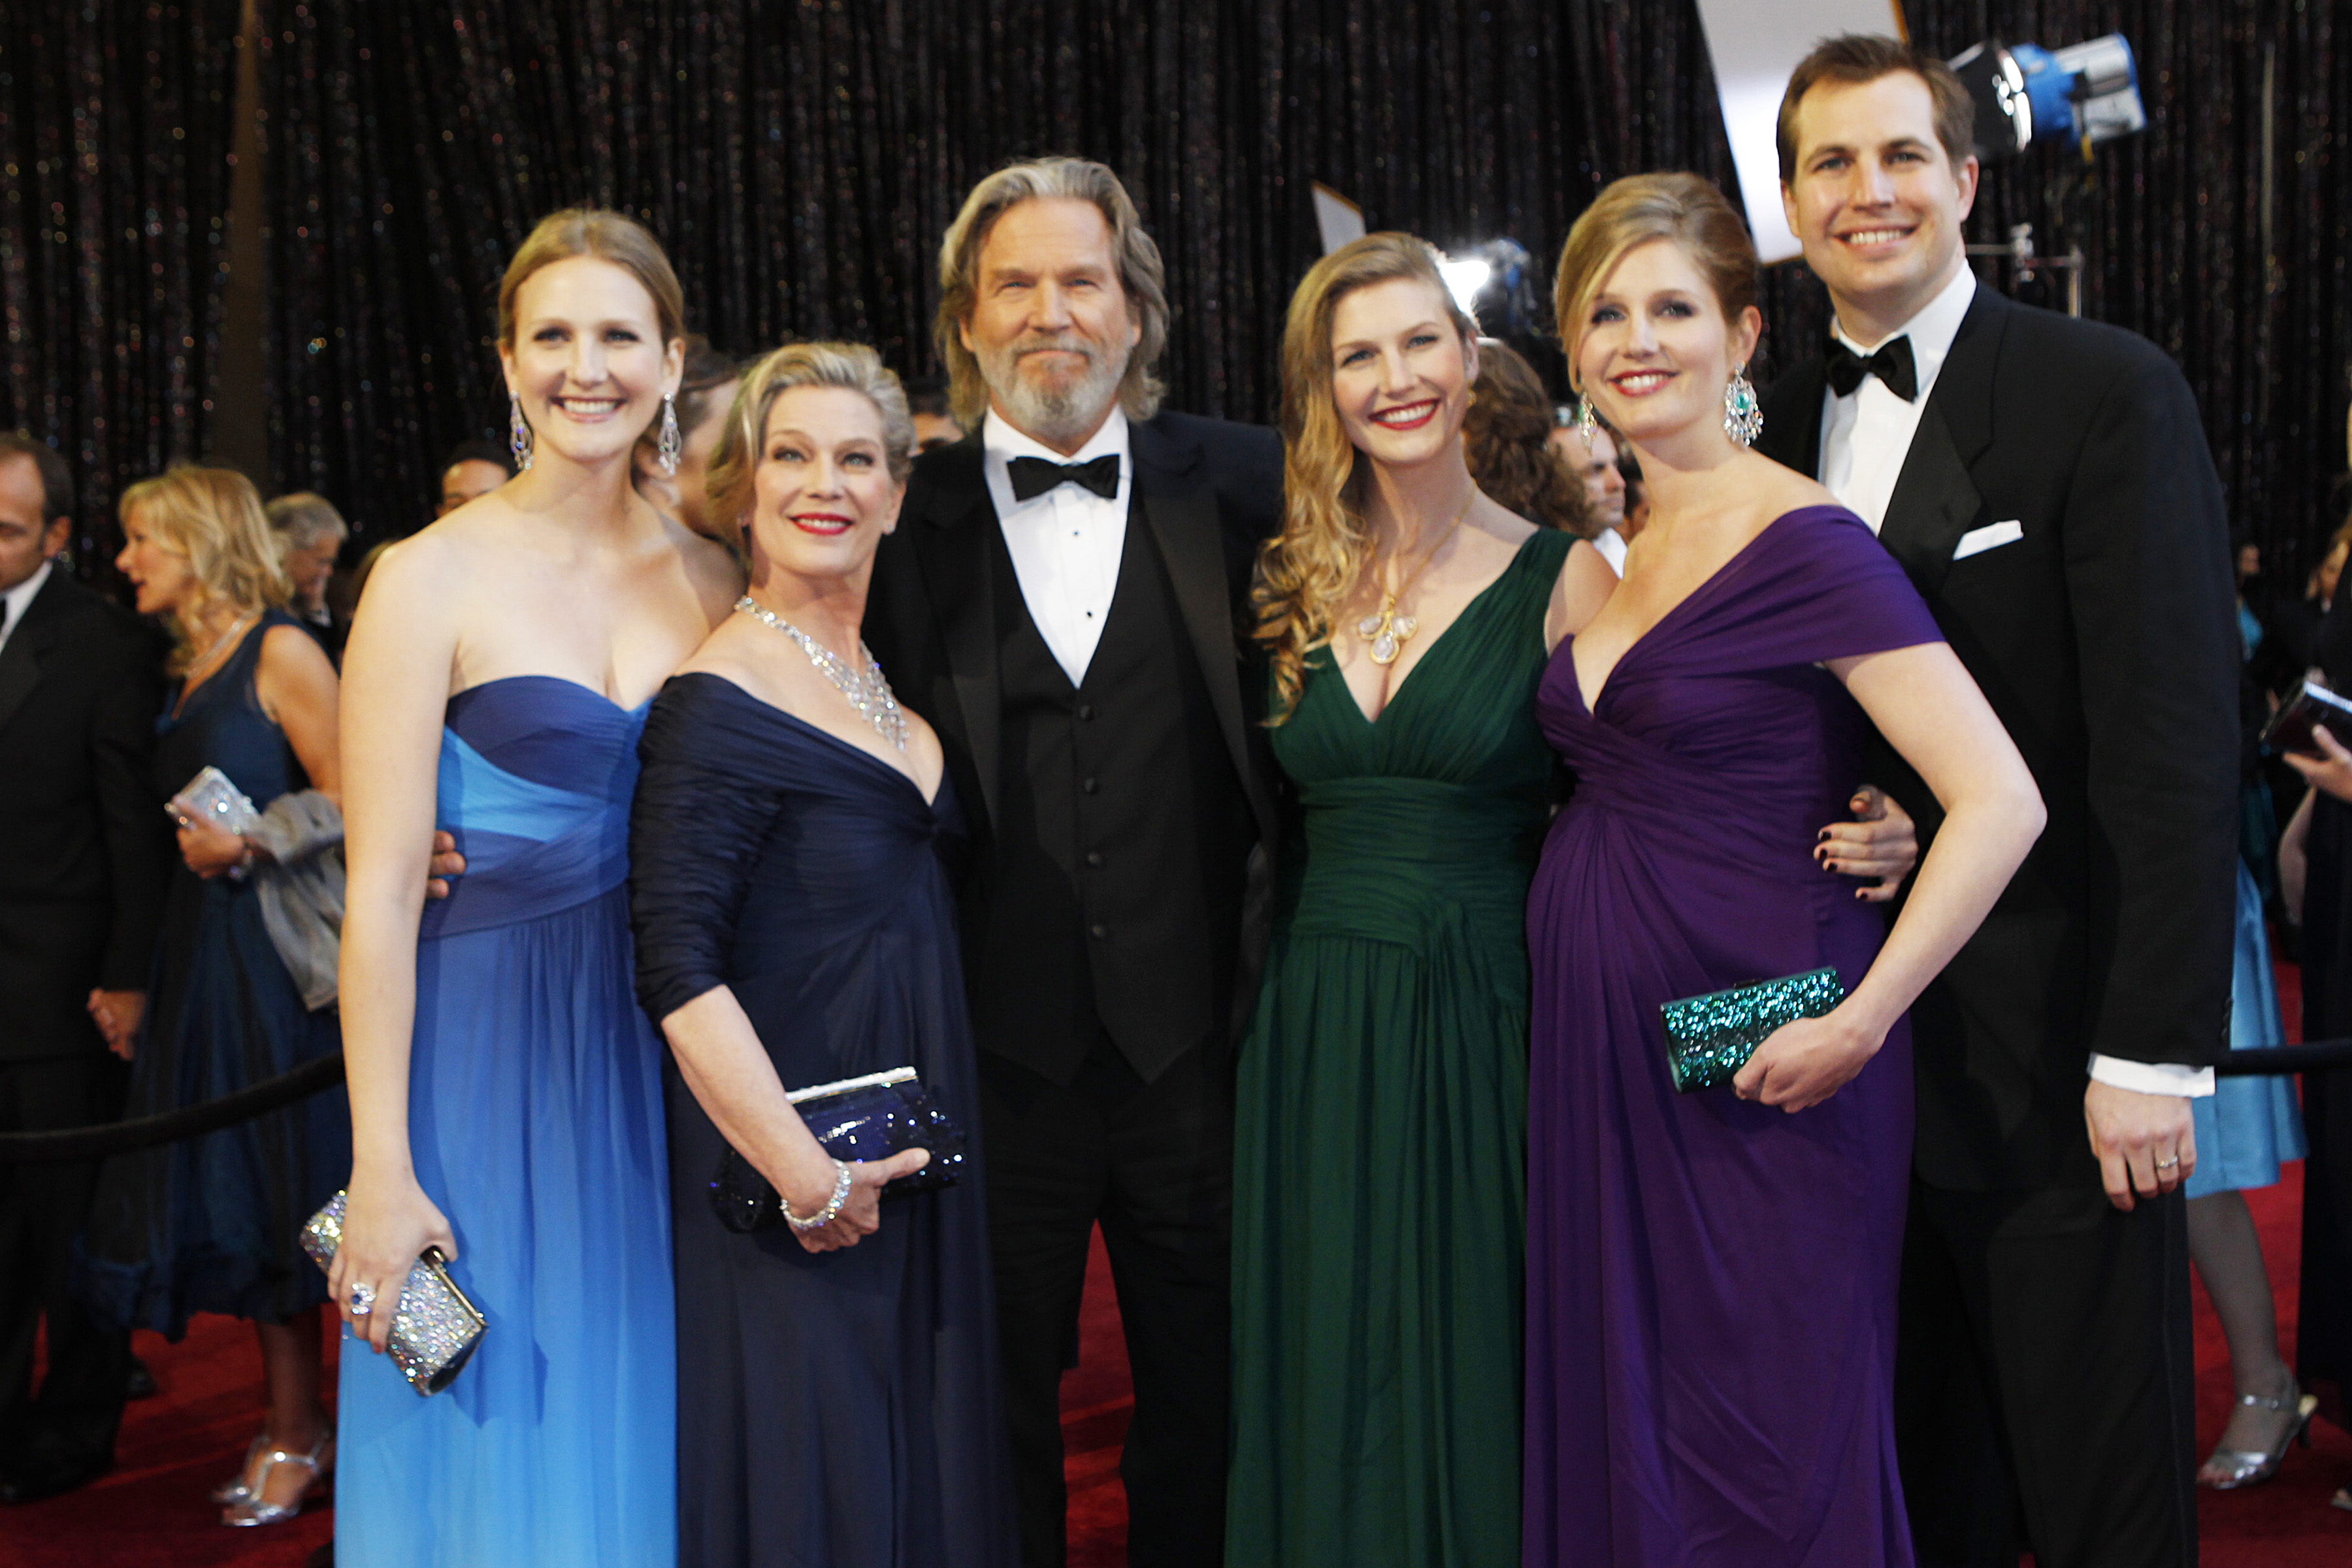 Jeff Bridges with Susan, daughters Isabelle, Jessica, Haley, and a guest attend the 83rd annual Academy Awards at the Kodak Theatre on February 27, 2001. | Source: Getty Images